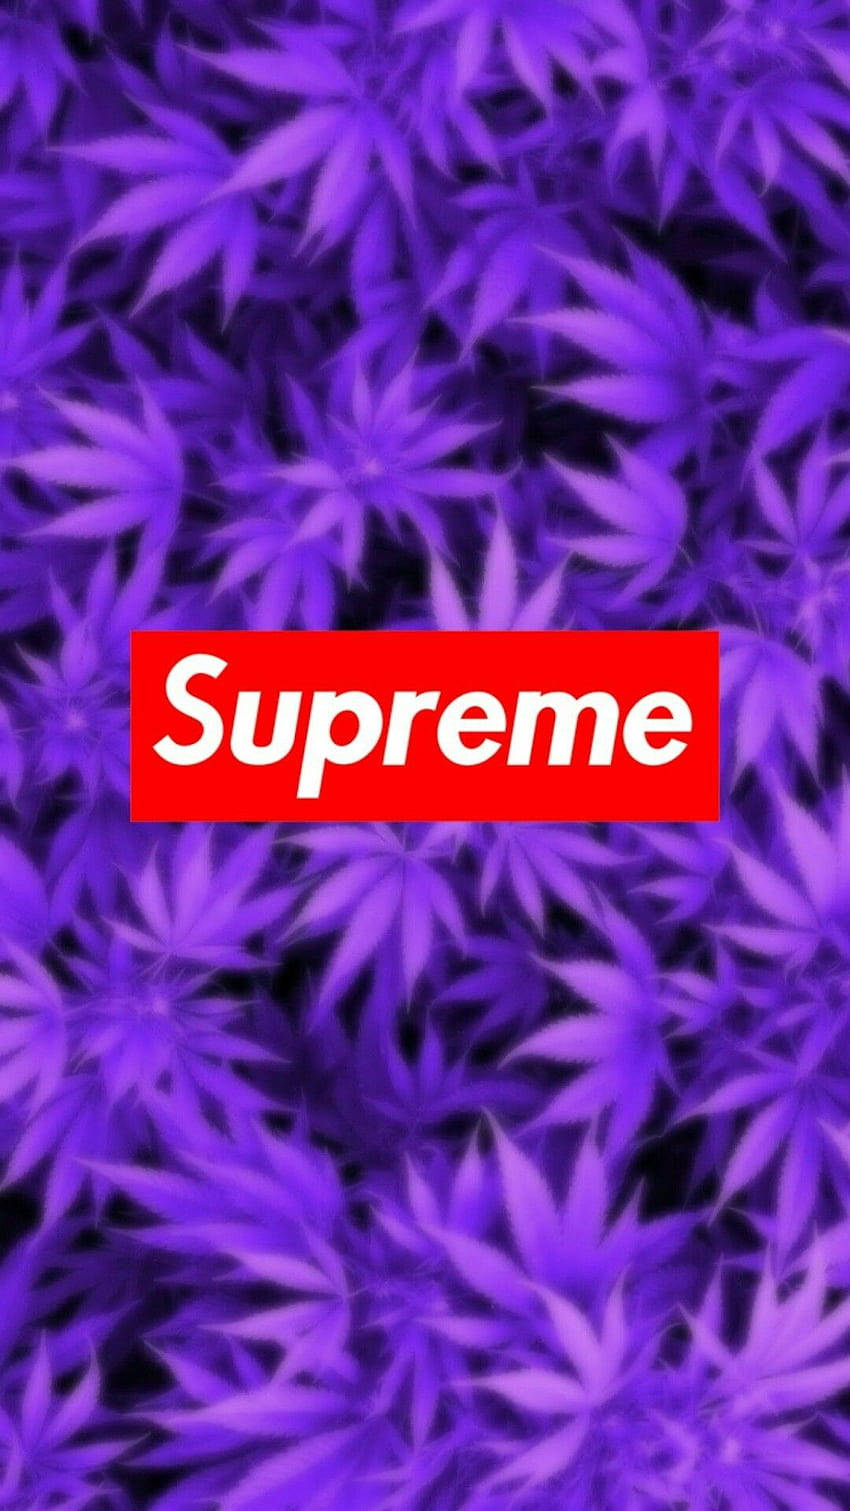 Supreme Aesthetic Red On Purple